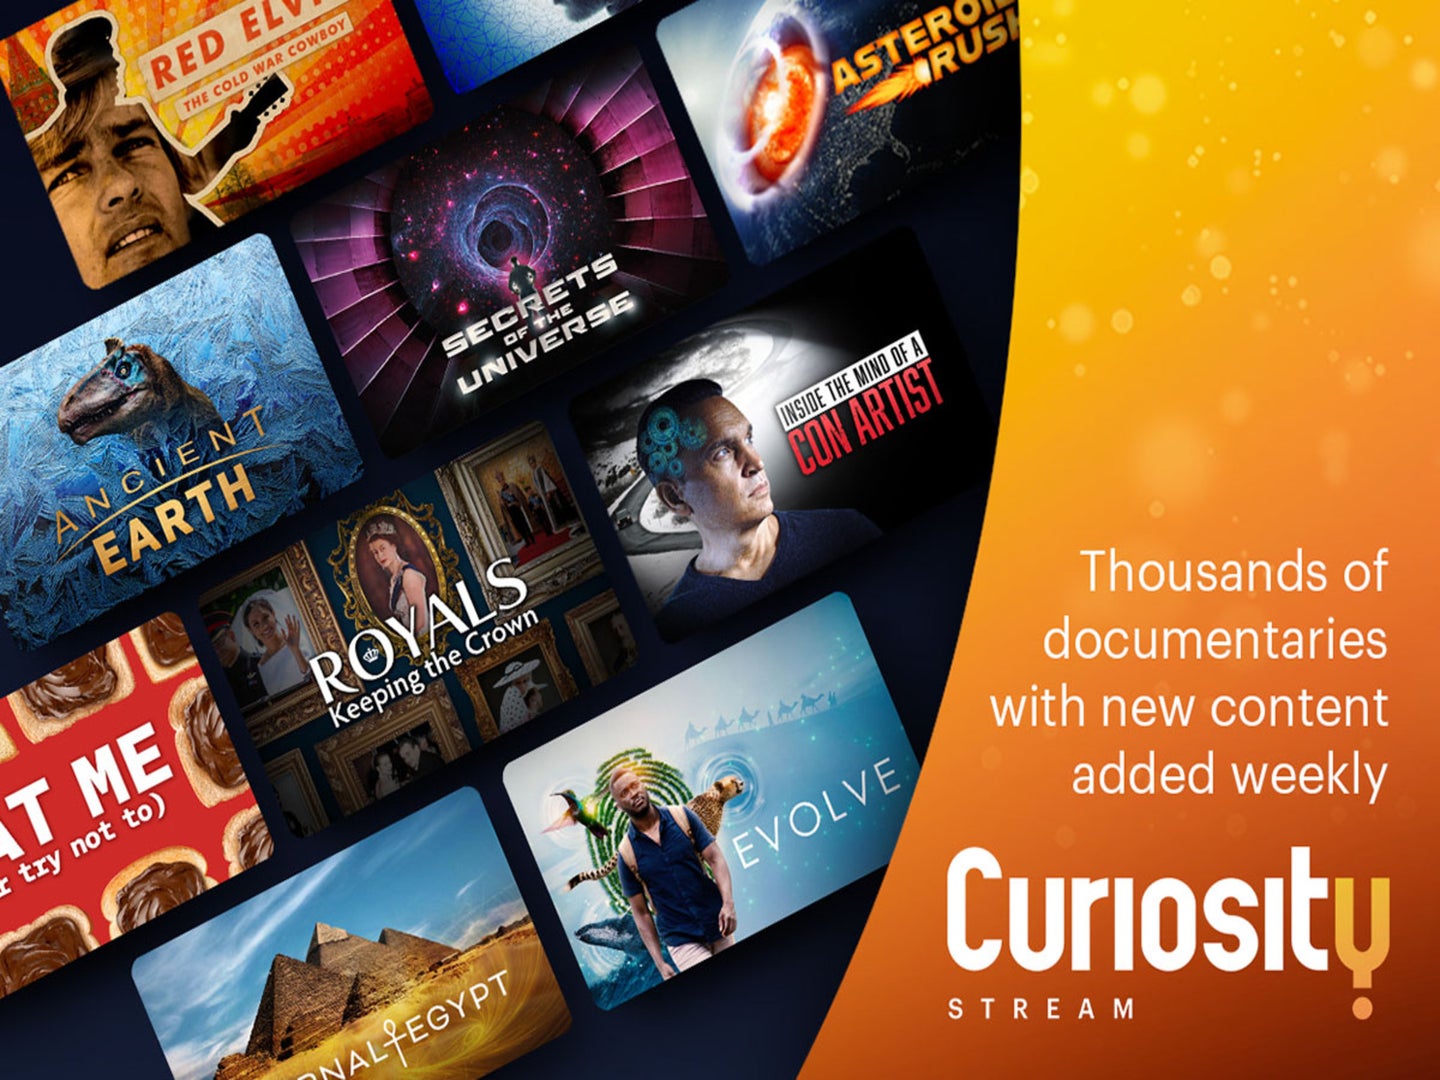 A promotional picture for Curiosity Stream